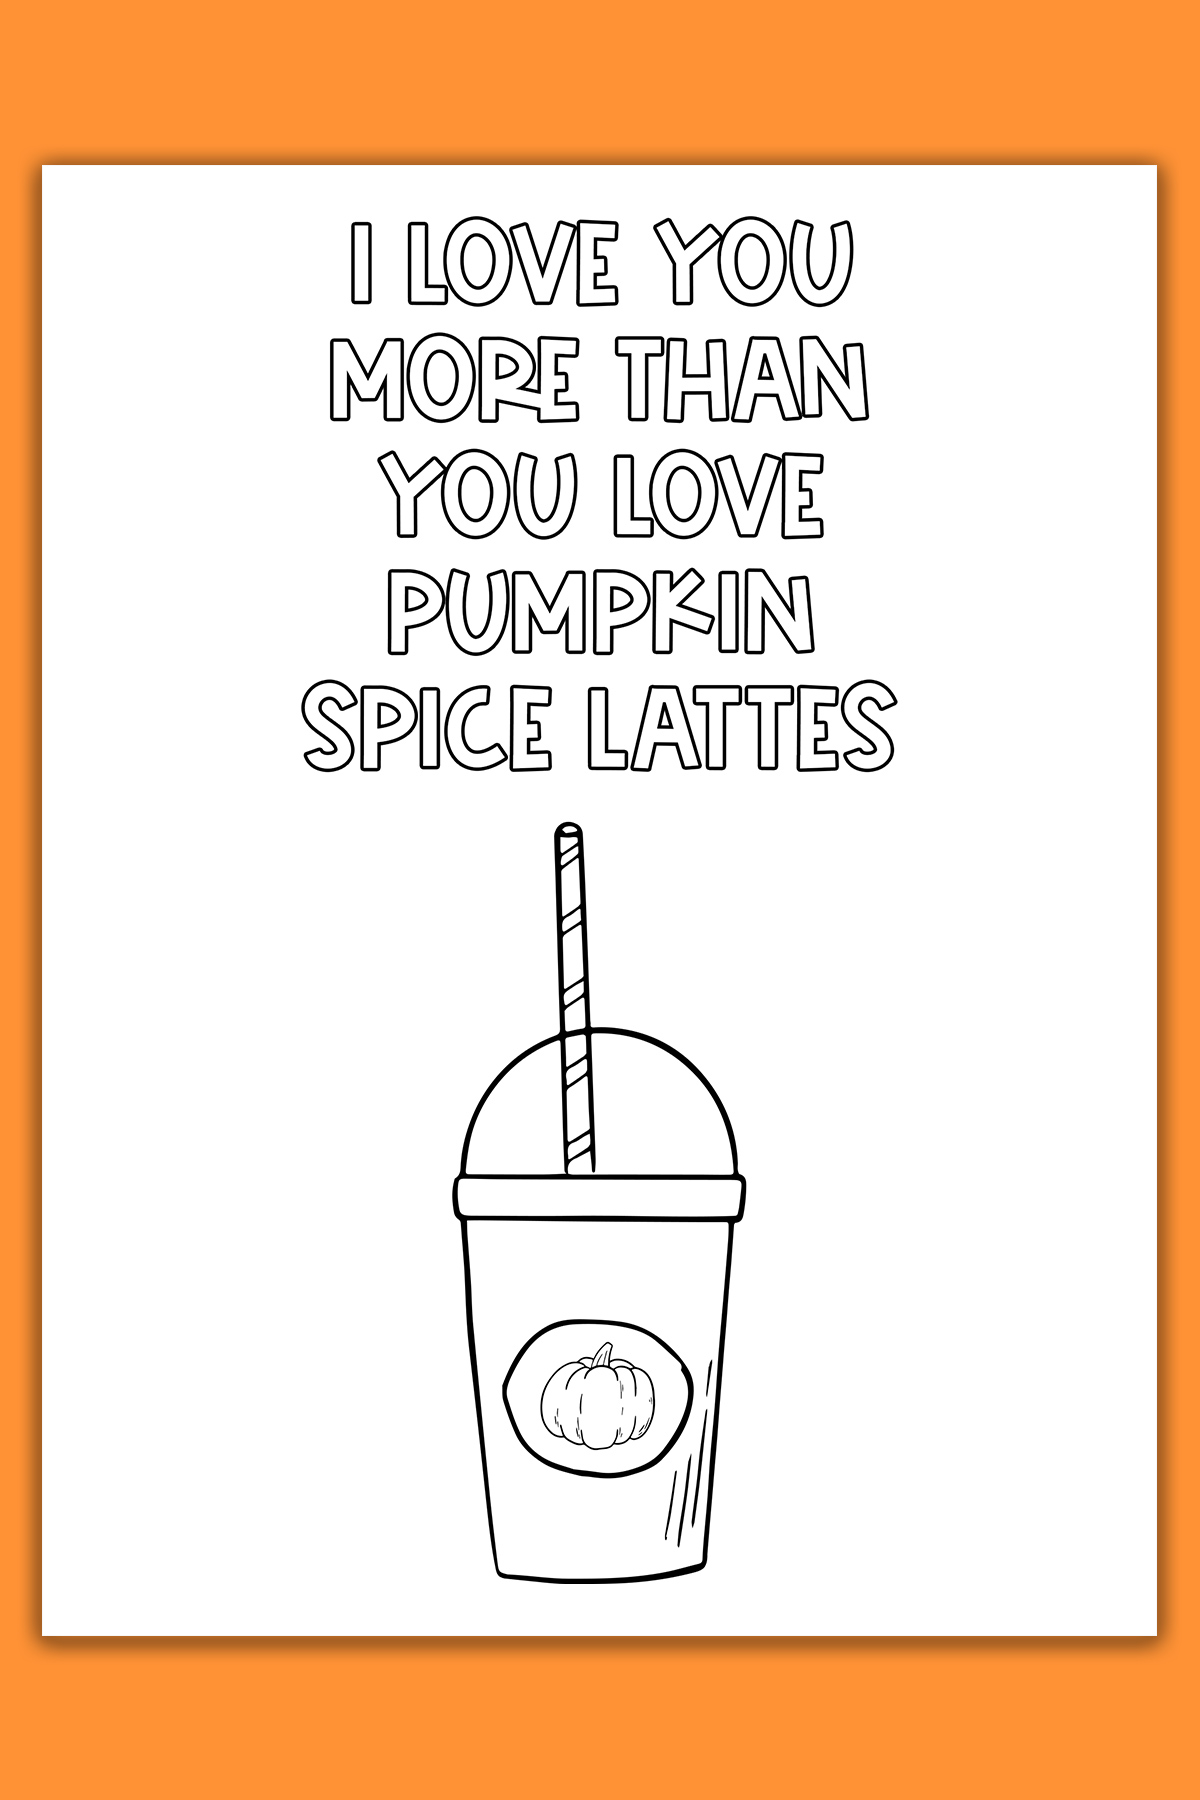 This image shows one of the cards from the thanksgiving cards coloring pages set. It says I love you more than you love pumpkin spice lattes. Below that is an image of a pumpkin spice latte.